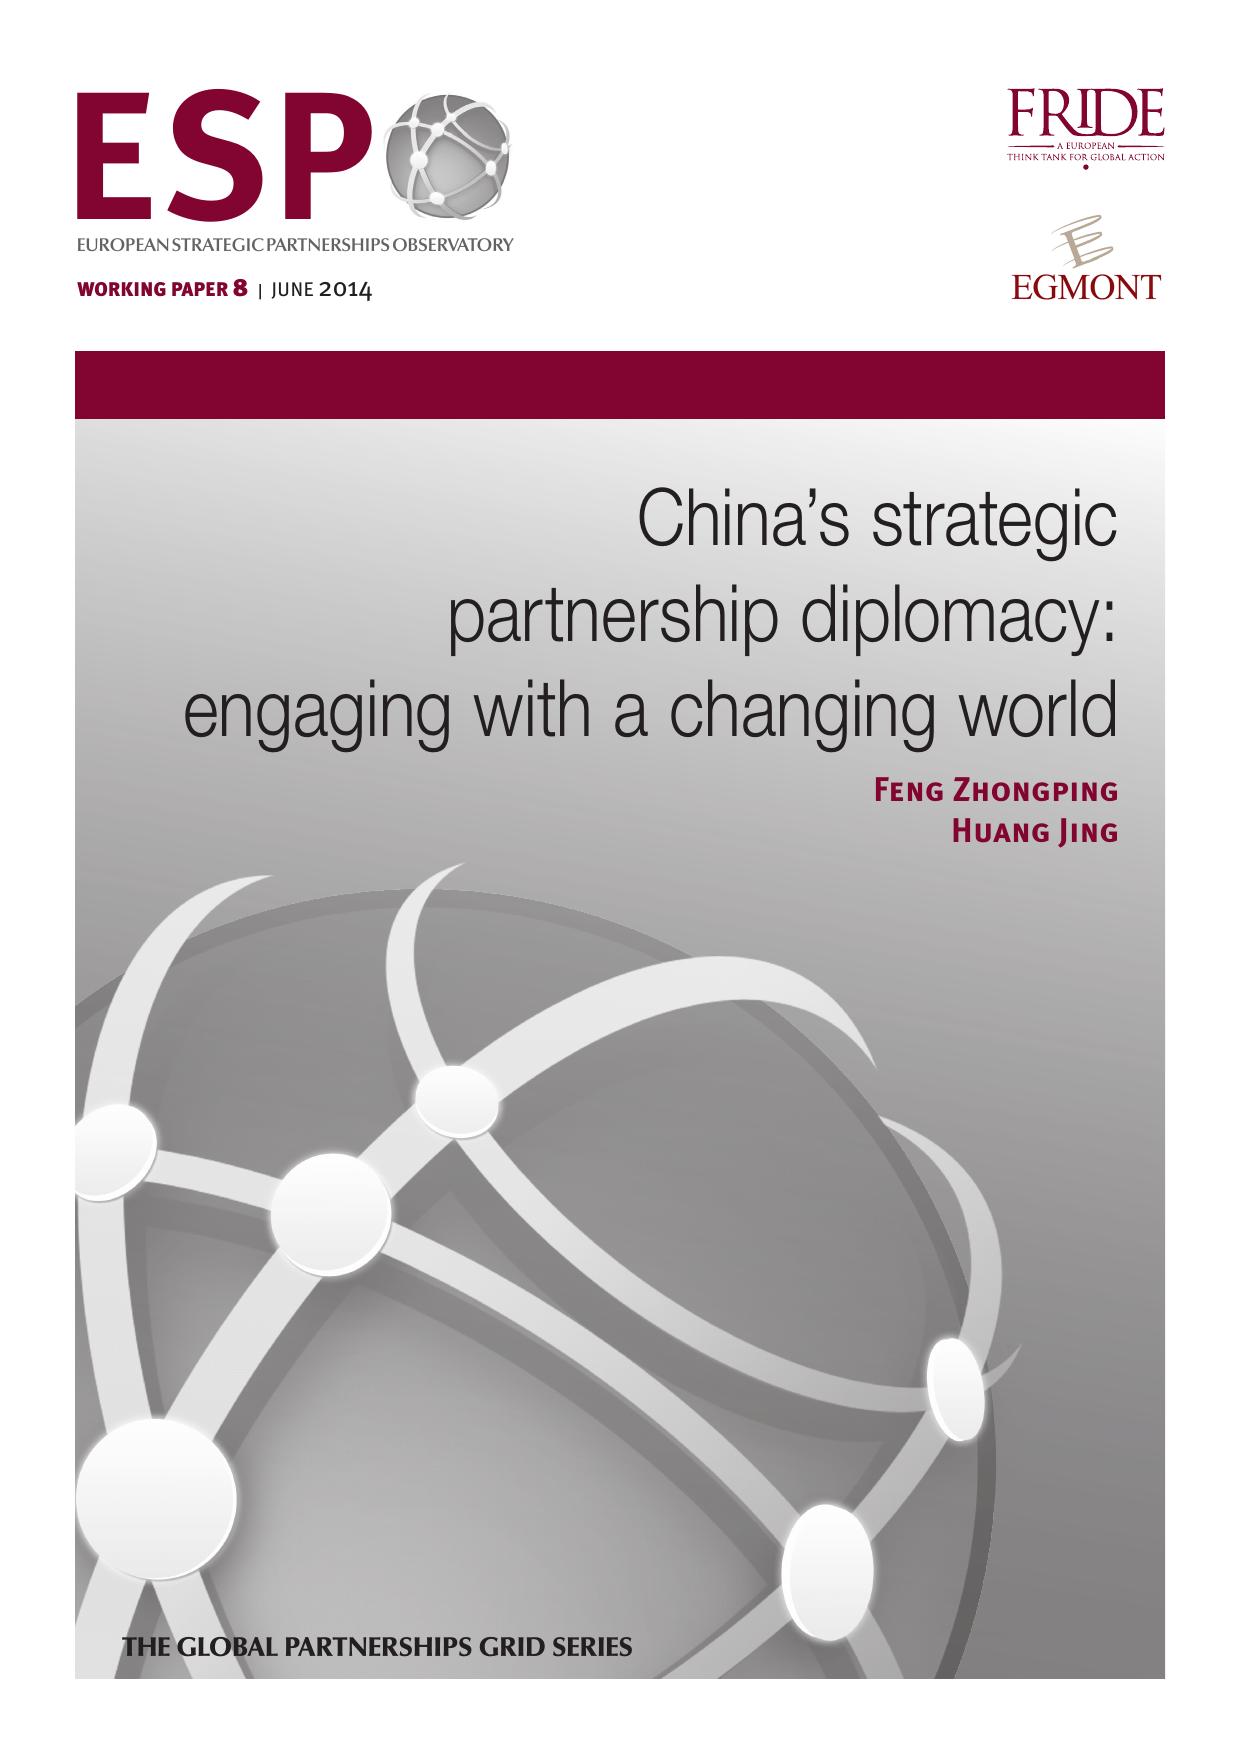 China’s strategic partnership diplomacy: engaging with a changing world